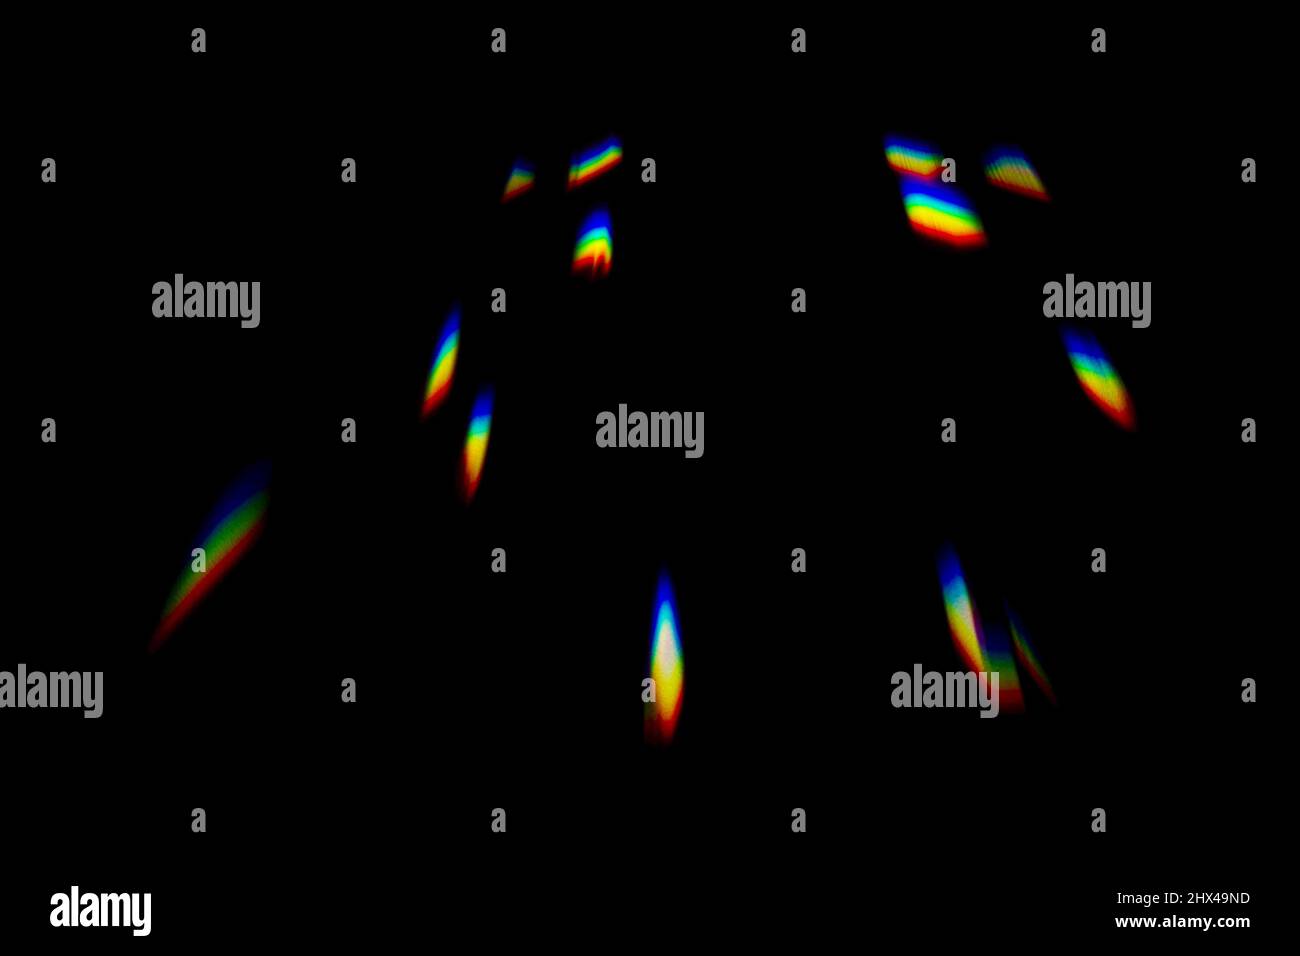 Isolated image on a black background of spectral gradient natural highlights. Stock Photo